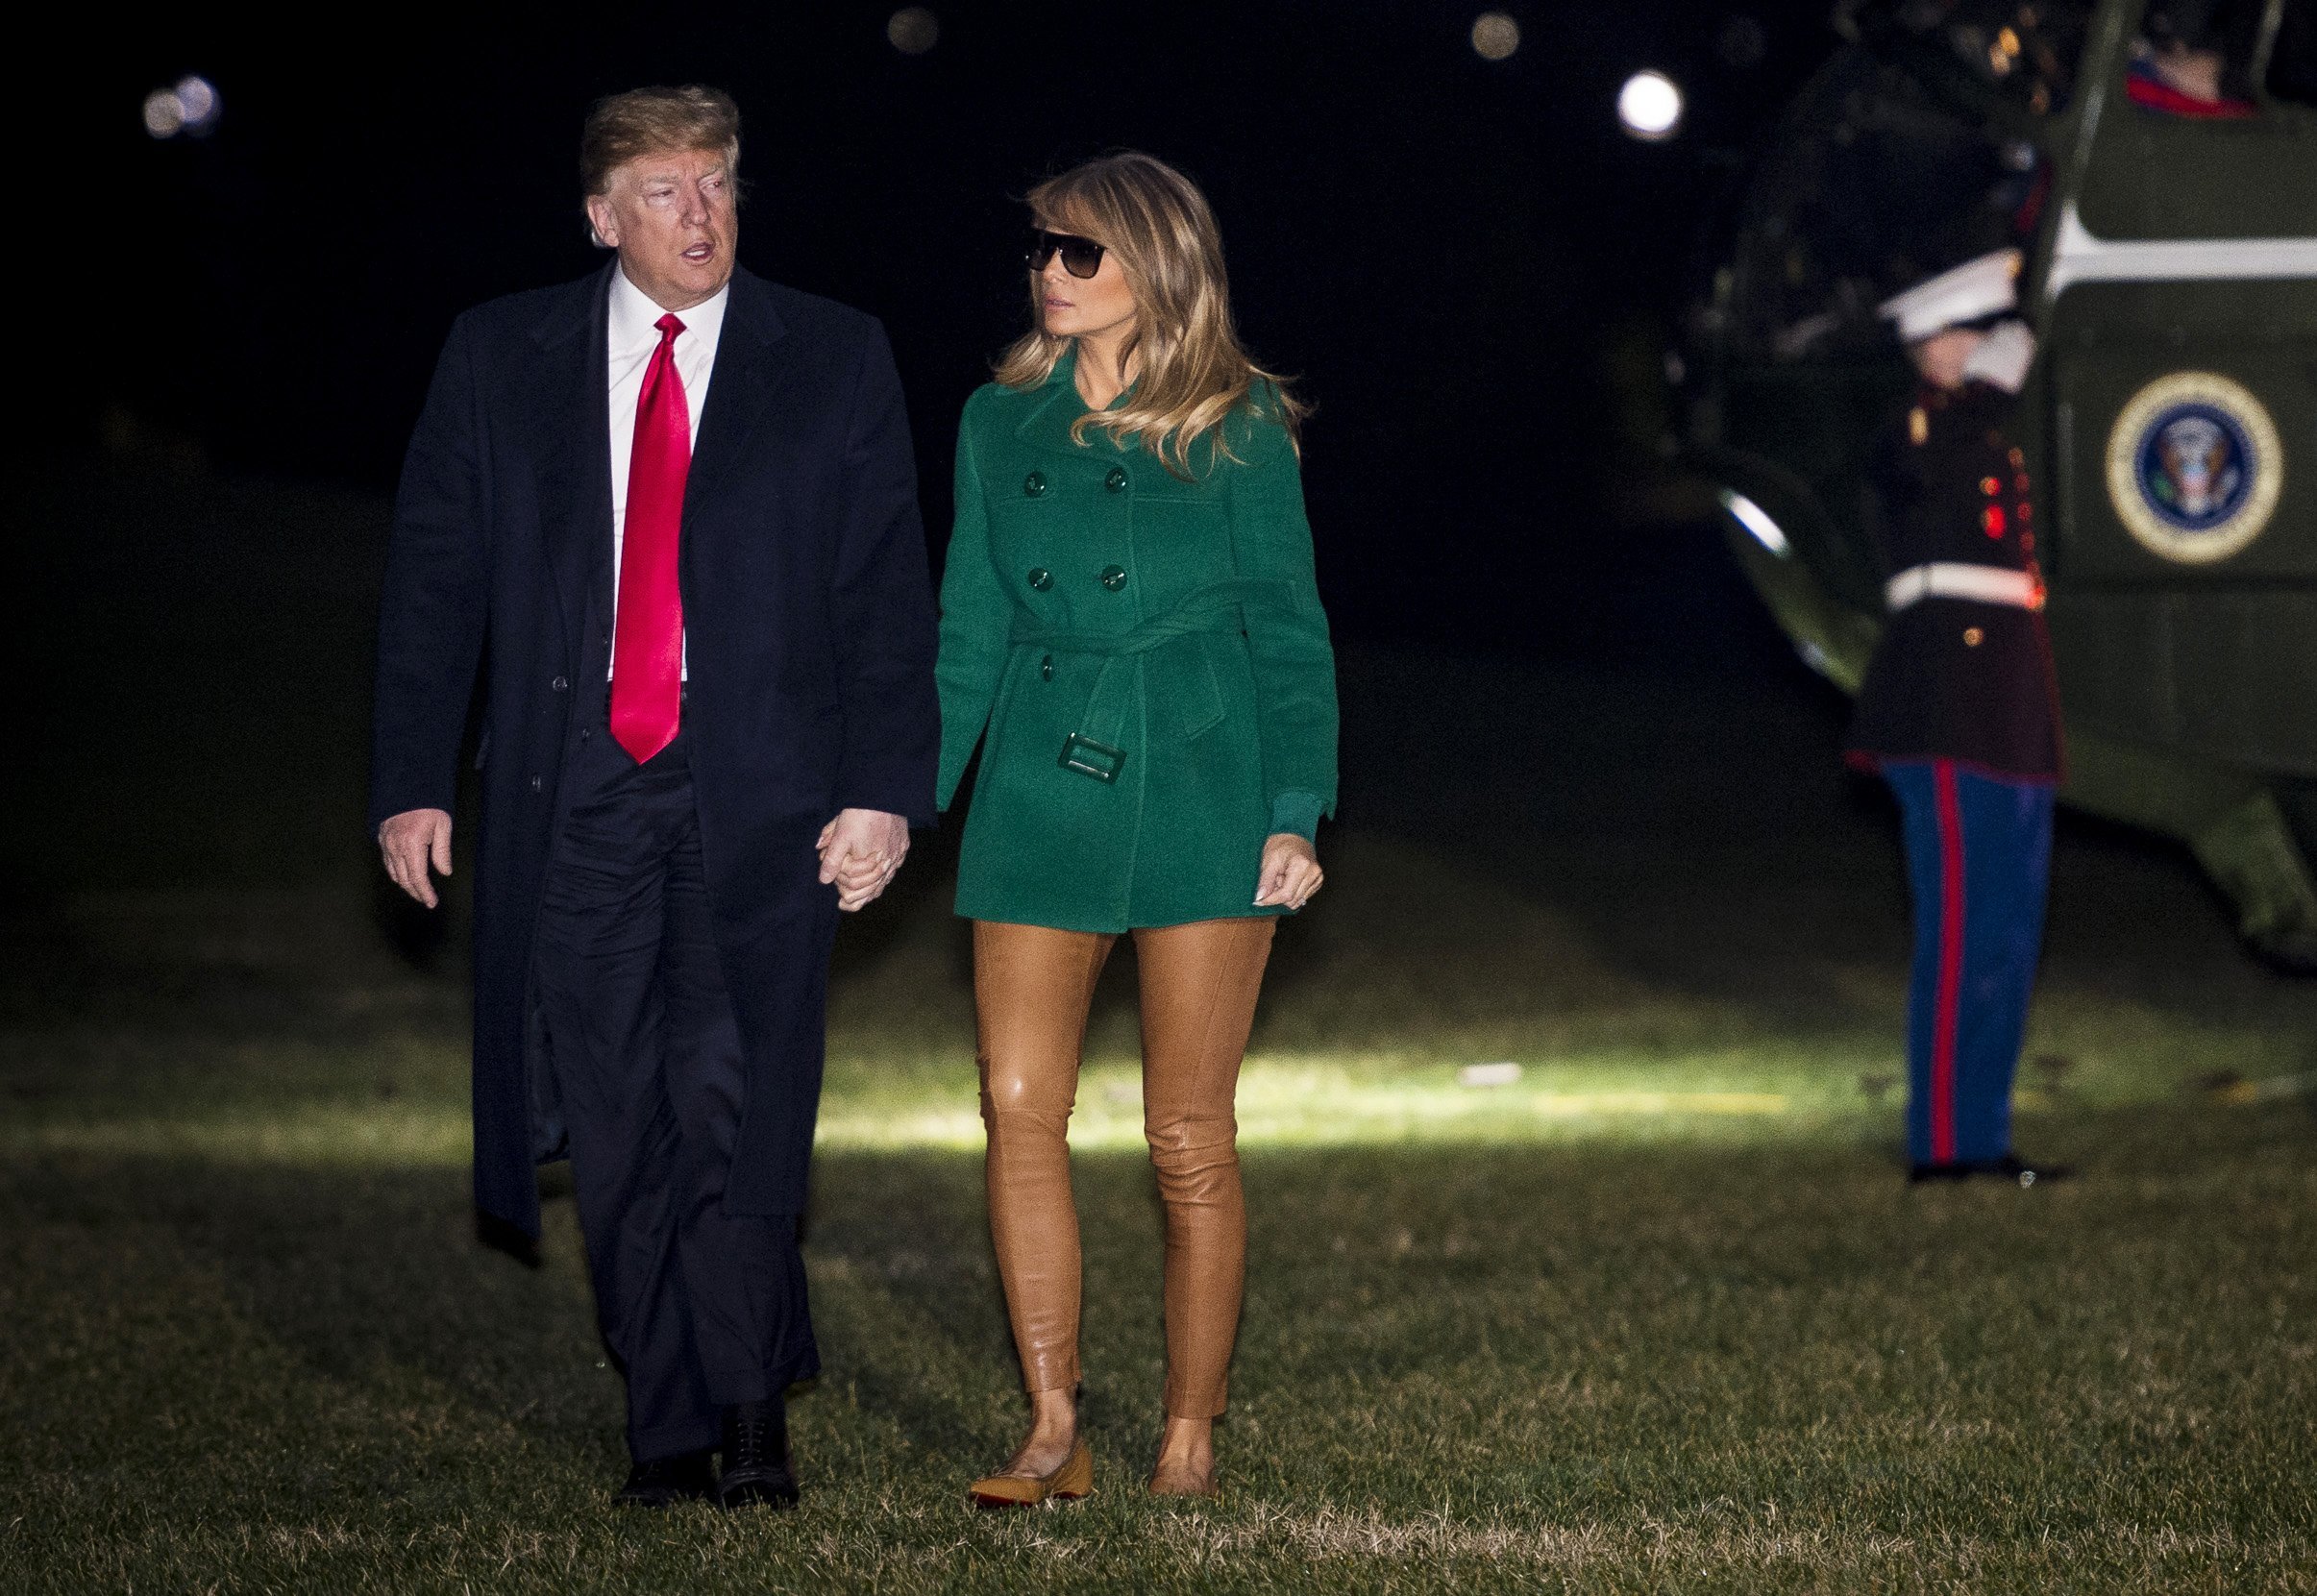 President Donald Trump and First Lady Melania Trump make their way across the South Lawn of the White House after returning on Marine One from their surprise trip to Al Asad Air Base in Iraq to visit troops, on December 27, 2018 | Photo: GettyImages